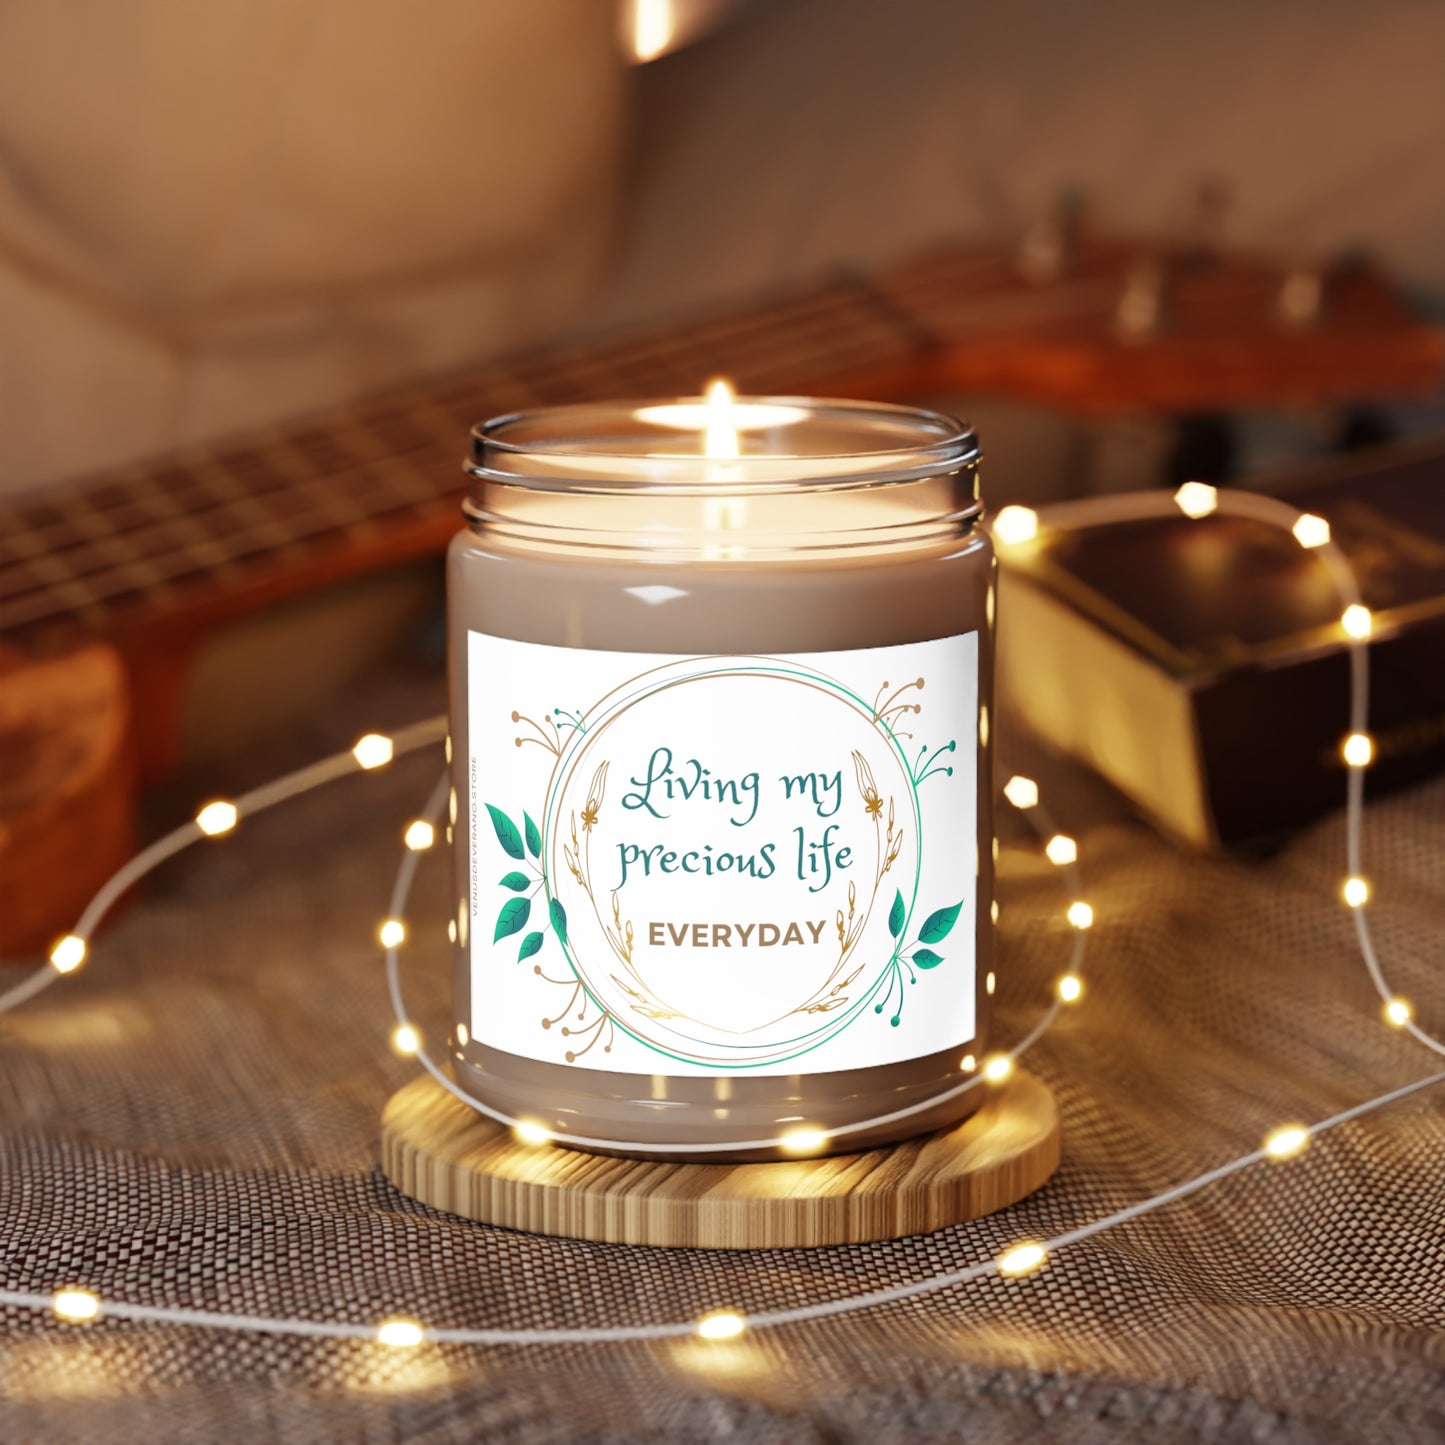 Scented Candles, 9oz - Living my PRECIOUS LIFE- Made 100% natural soy wax blend and cotton wick - Vanilla Bean, Comfort Spice and Sea Breeze fragrances available.